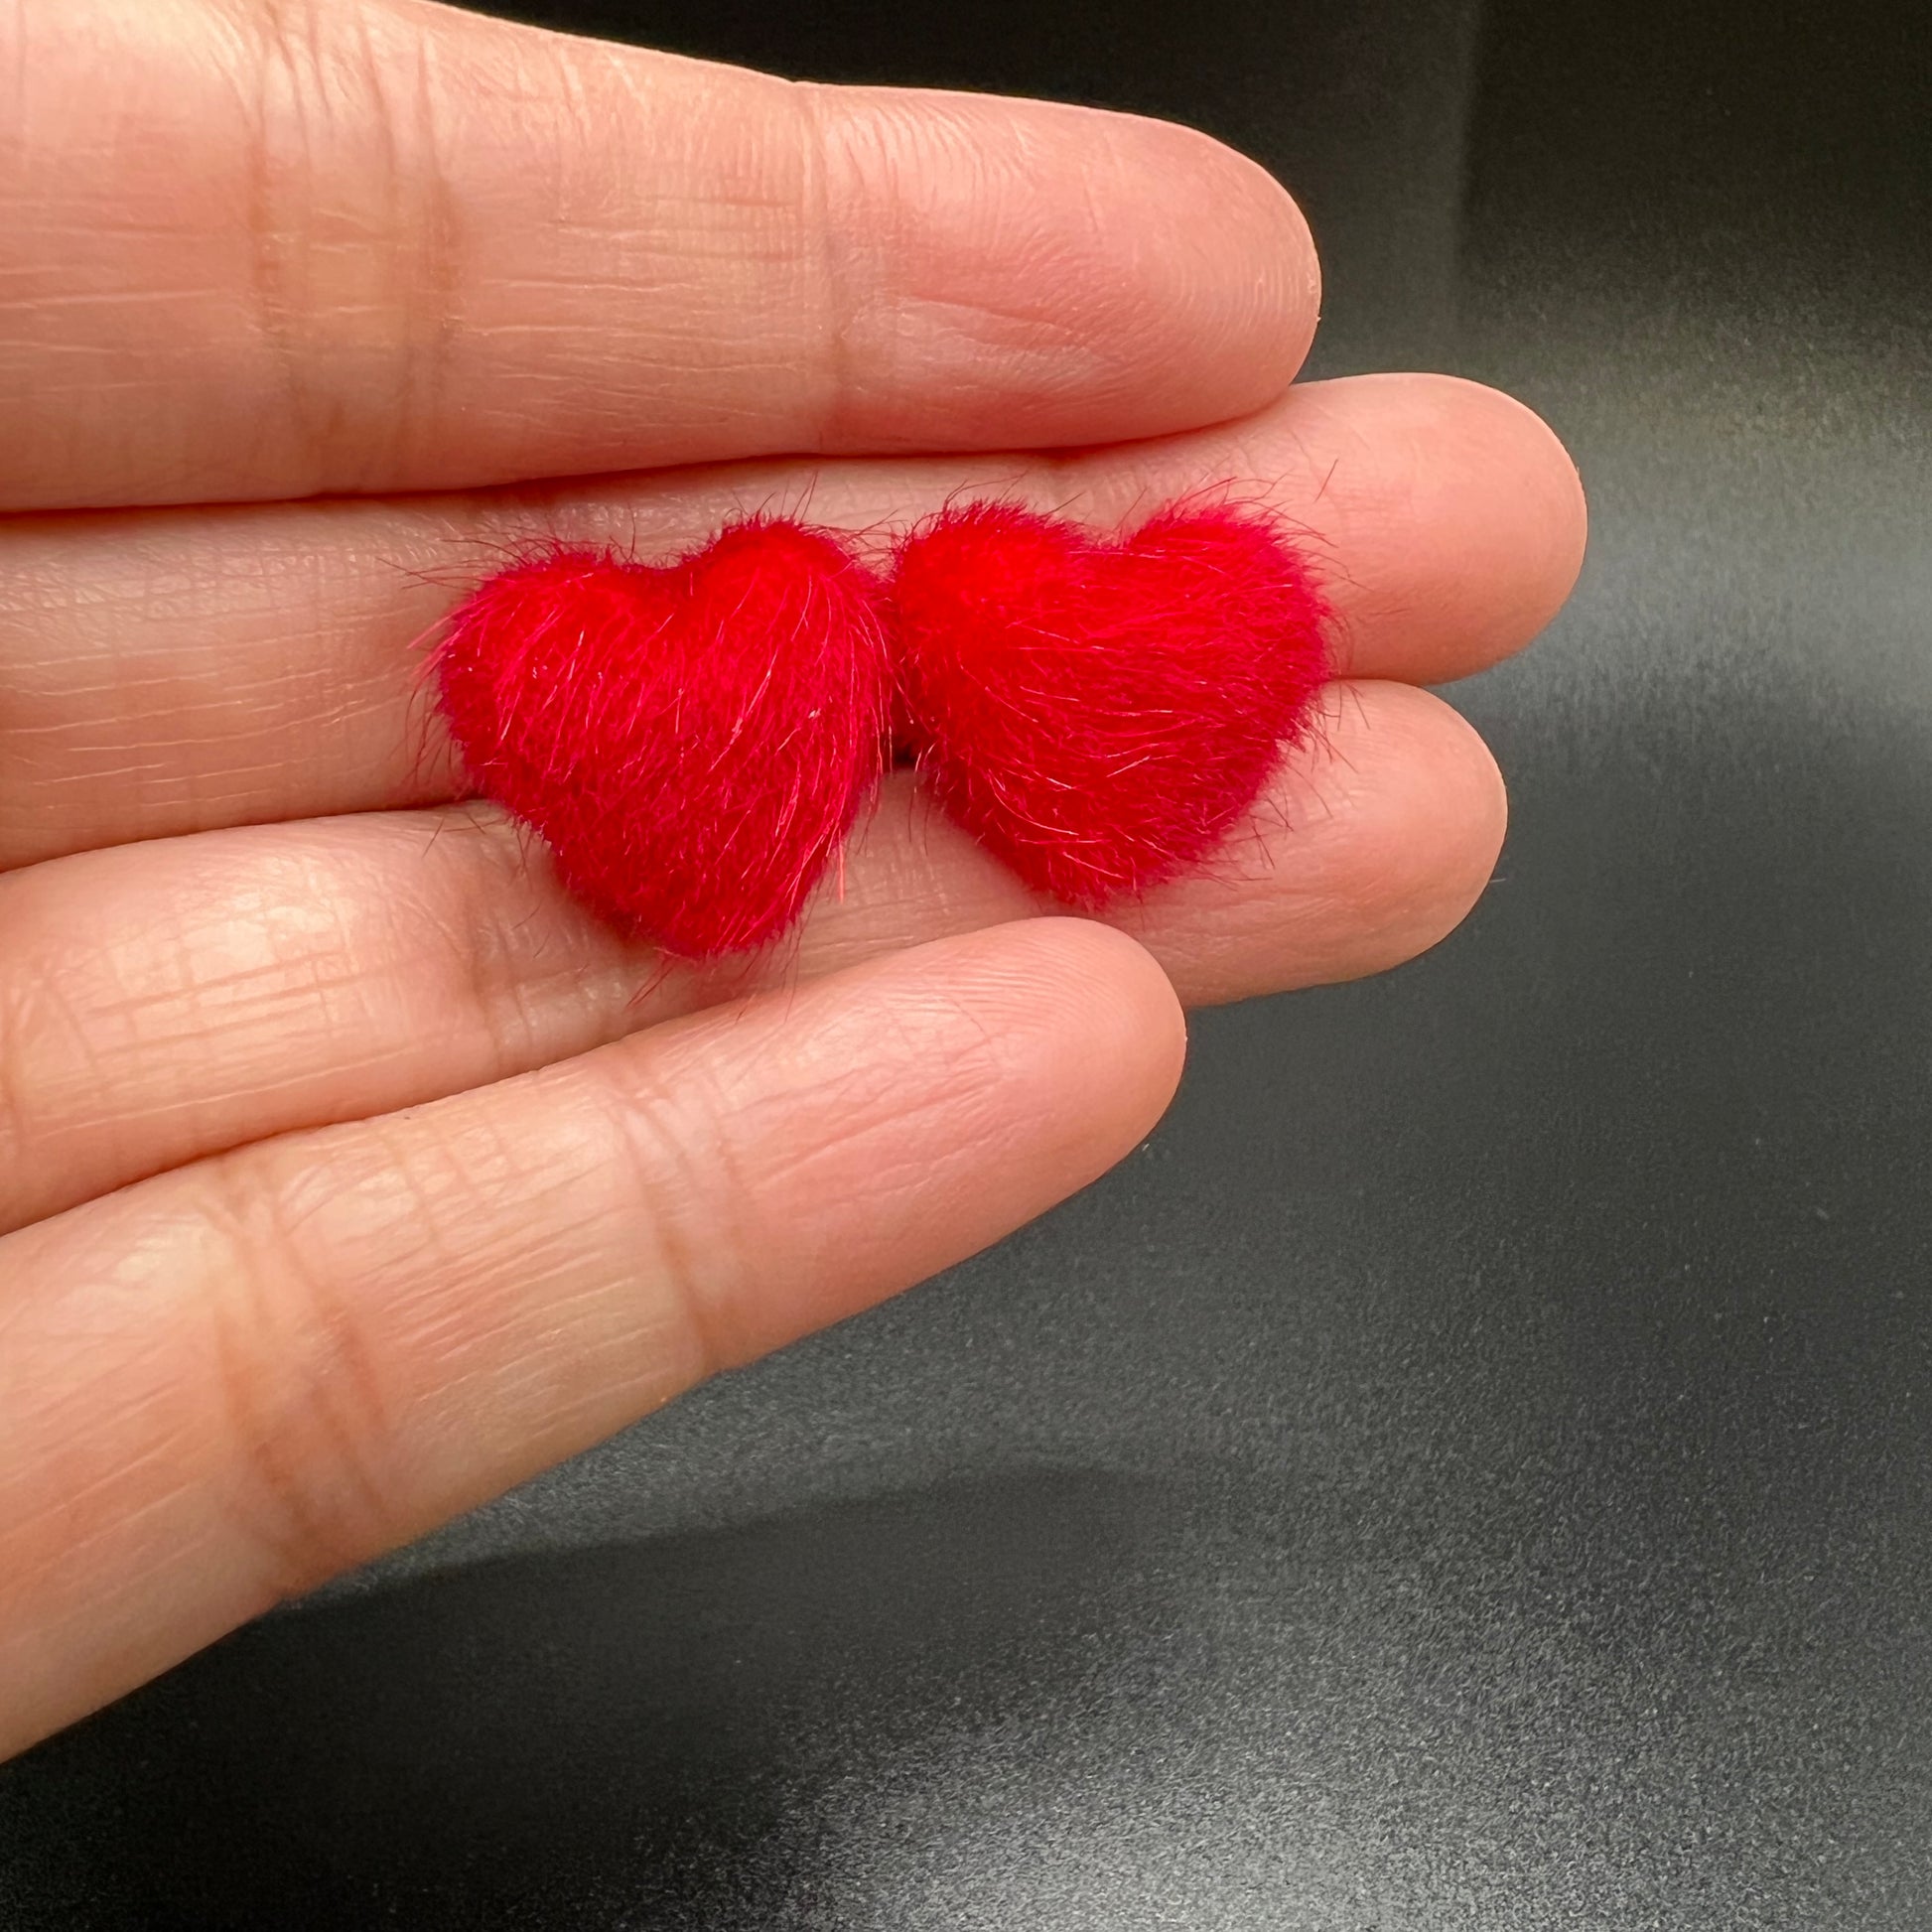 Adorable Red Fuzzy Teddy Bear Heart Earrings – a sweet Valentine's Day gift. Handmade with love for a cozy and stylish touch. Shop now at Extra Kitsch! 